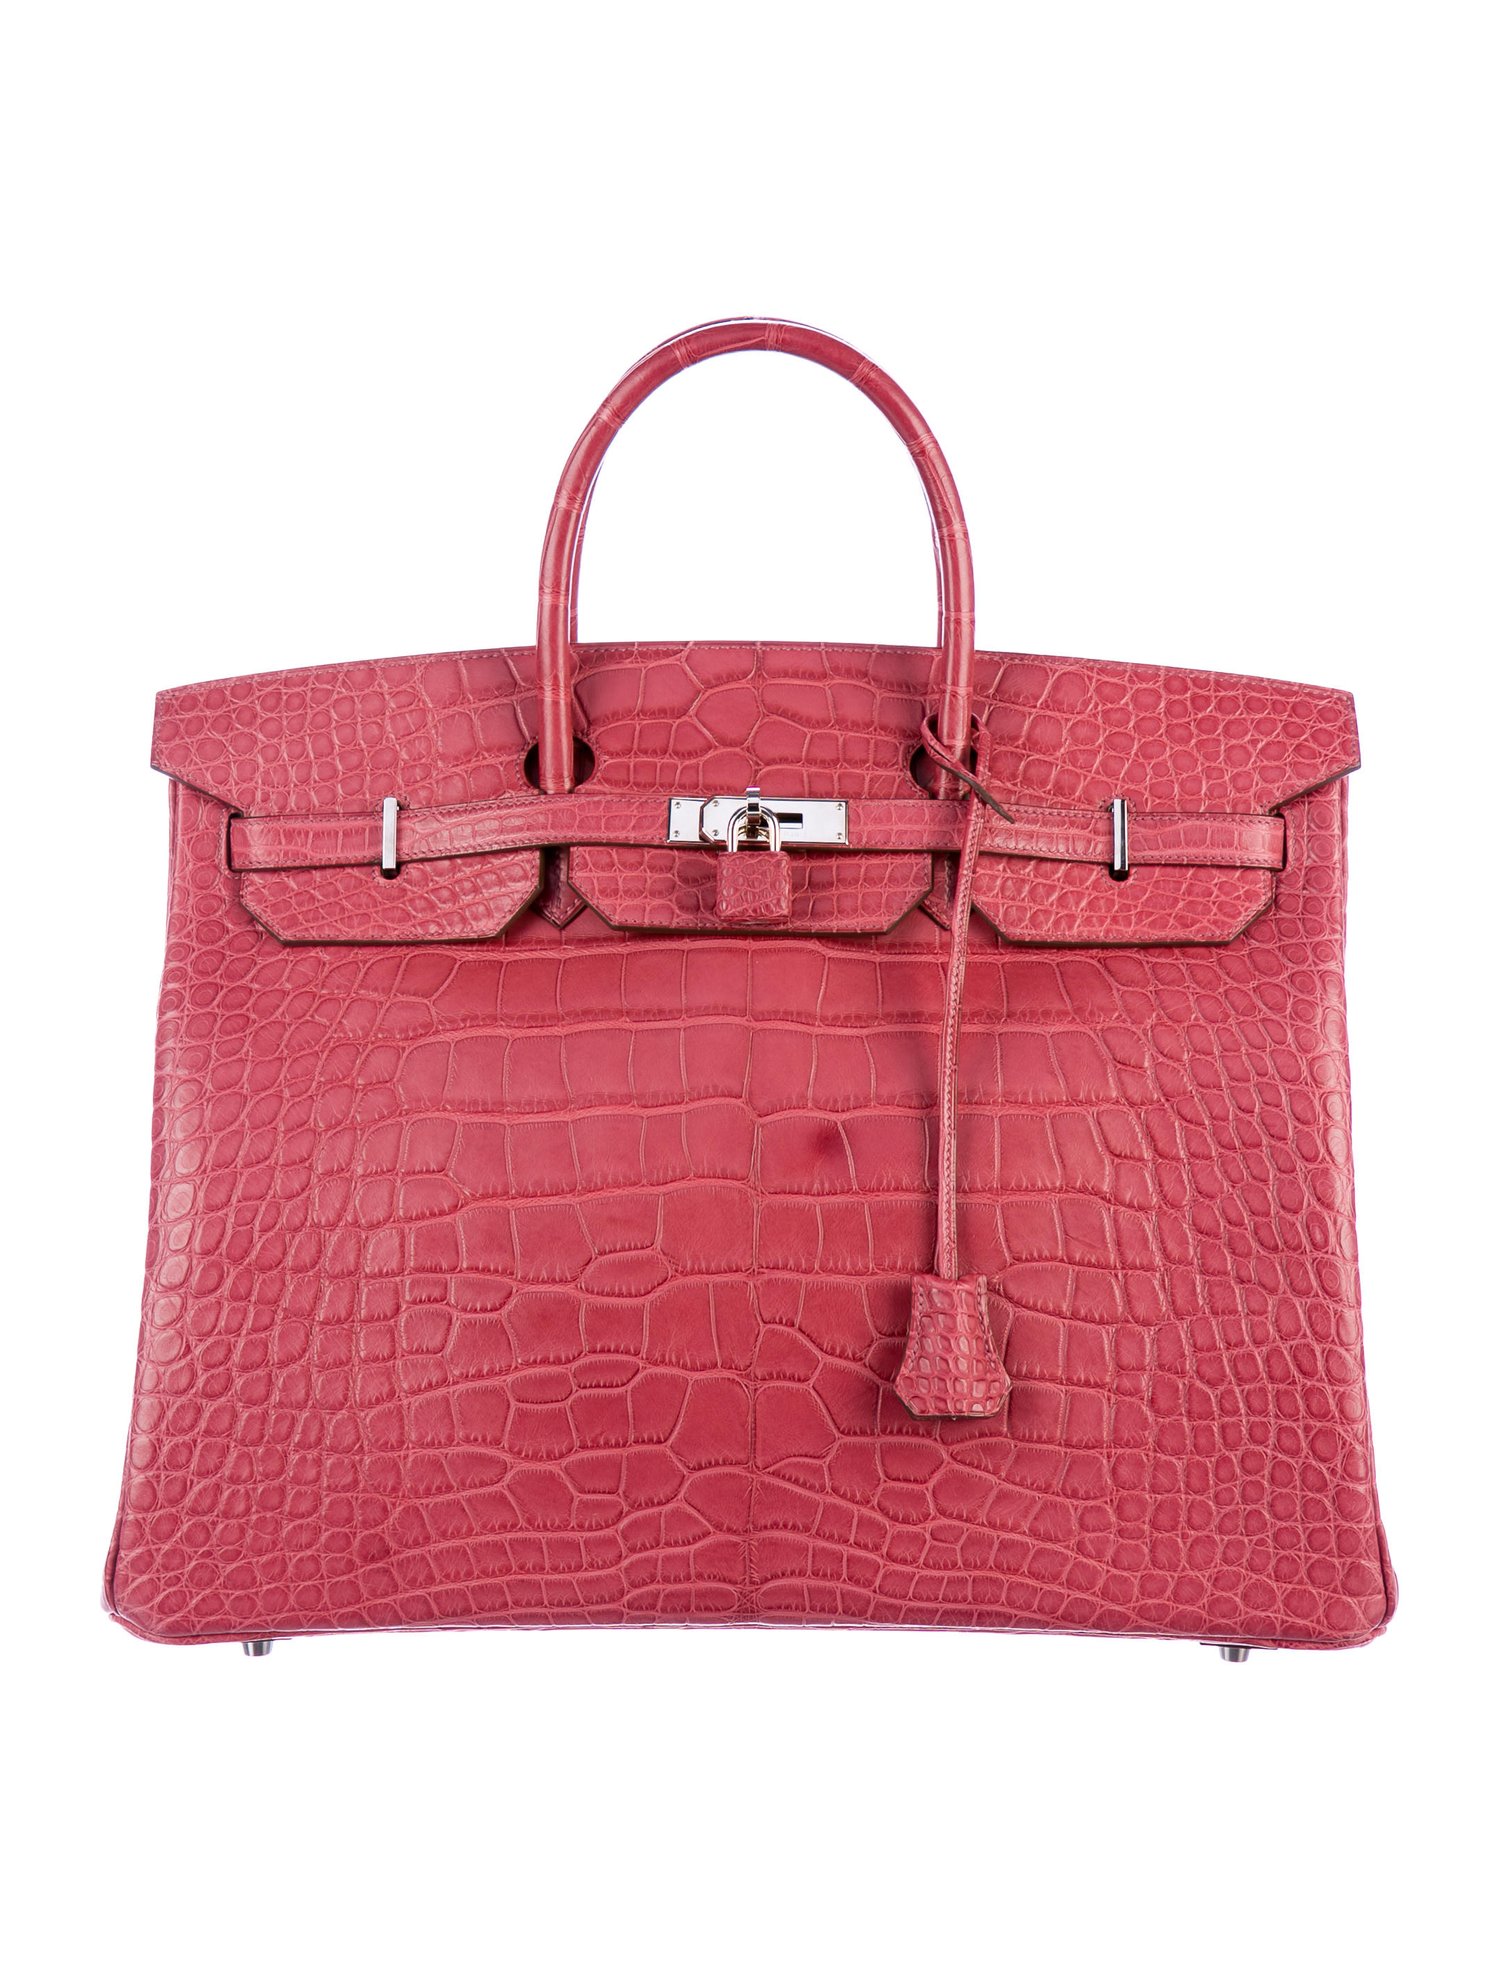 List Of Expensive Bags Brands Flash Sales, 56% OFF | www 